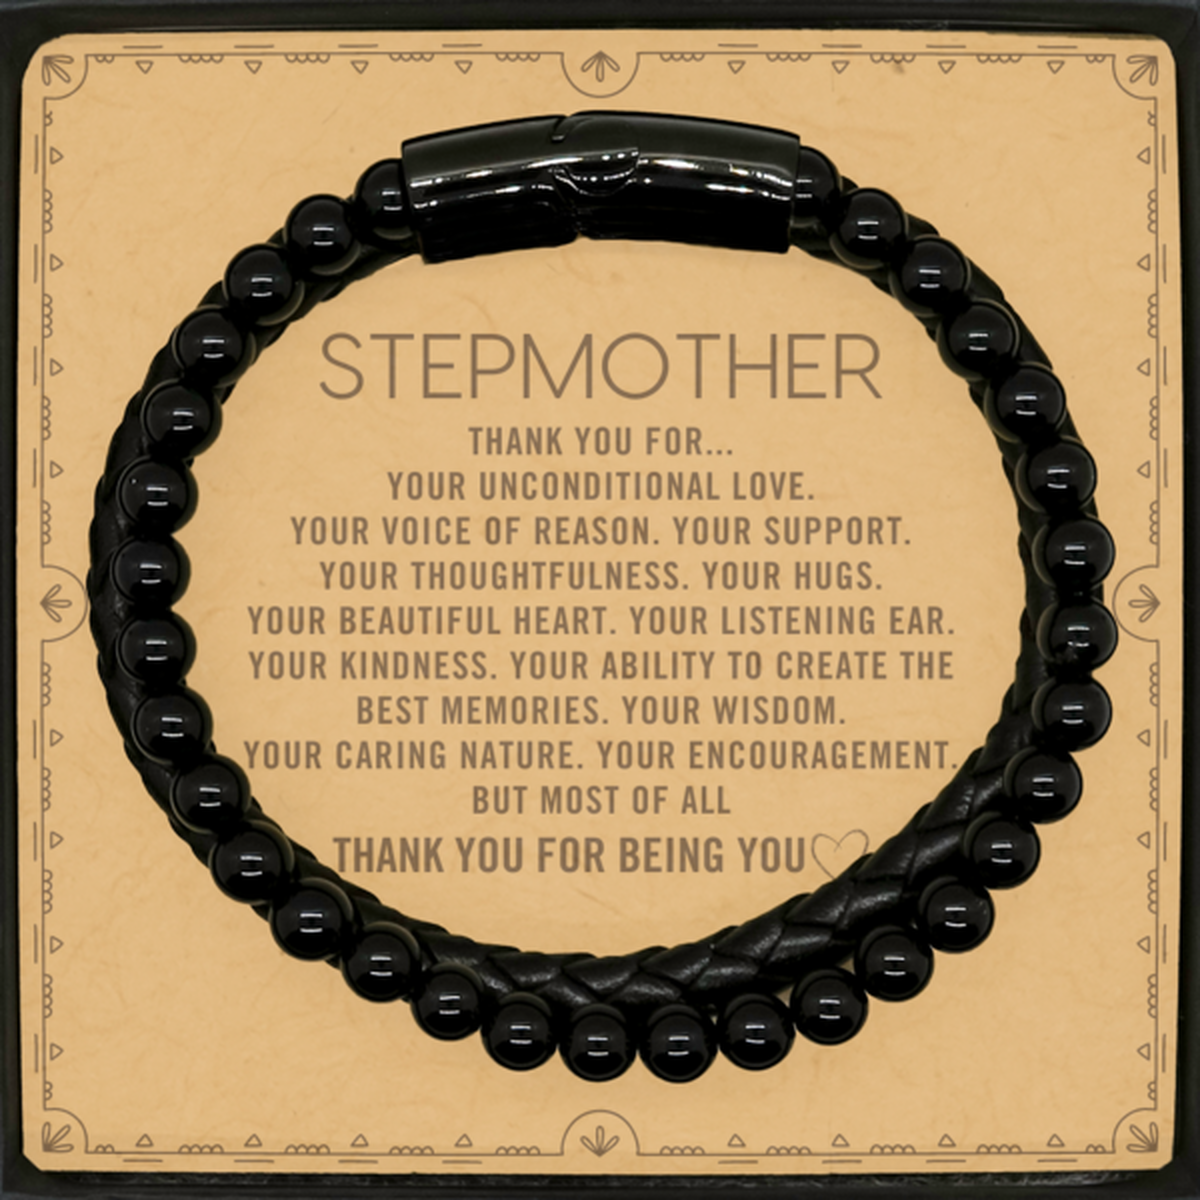 Stepmother Stone Leather Bracelets Custom, Message Card Gifts For Stepmother Christmas Graduation Birthday Gifts for Men Women Stepmother Thank you for Your unconditional love